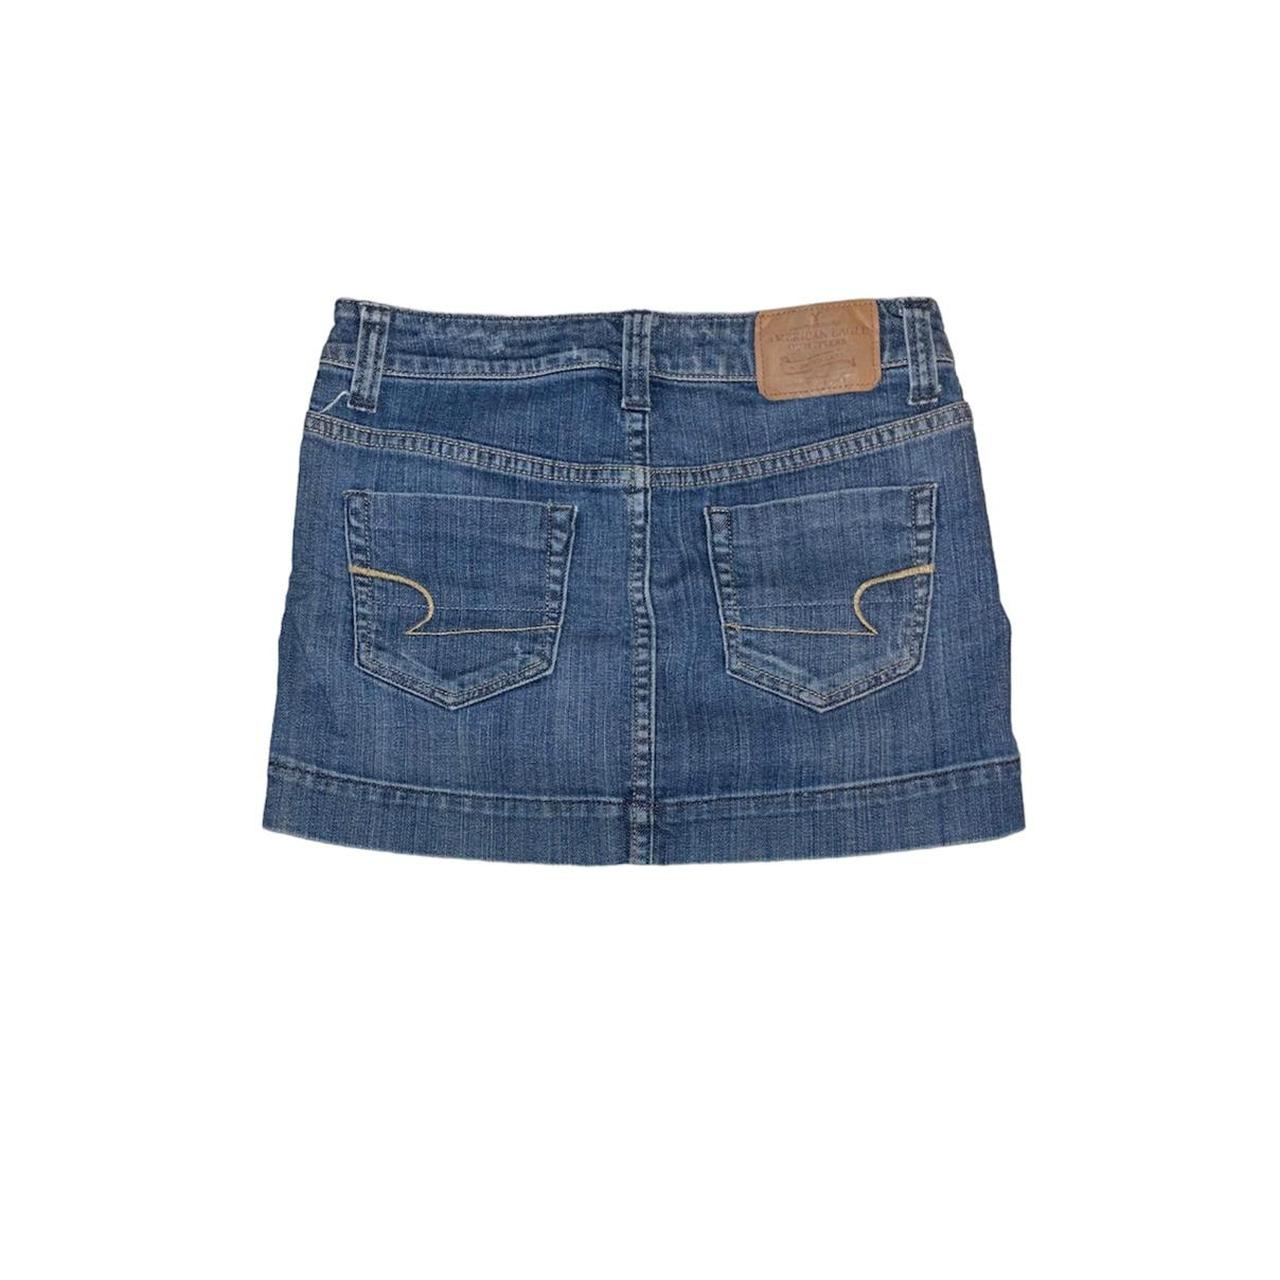 American Eagle Outfitters Women's Navy and Blue Skirt (3)